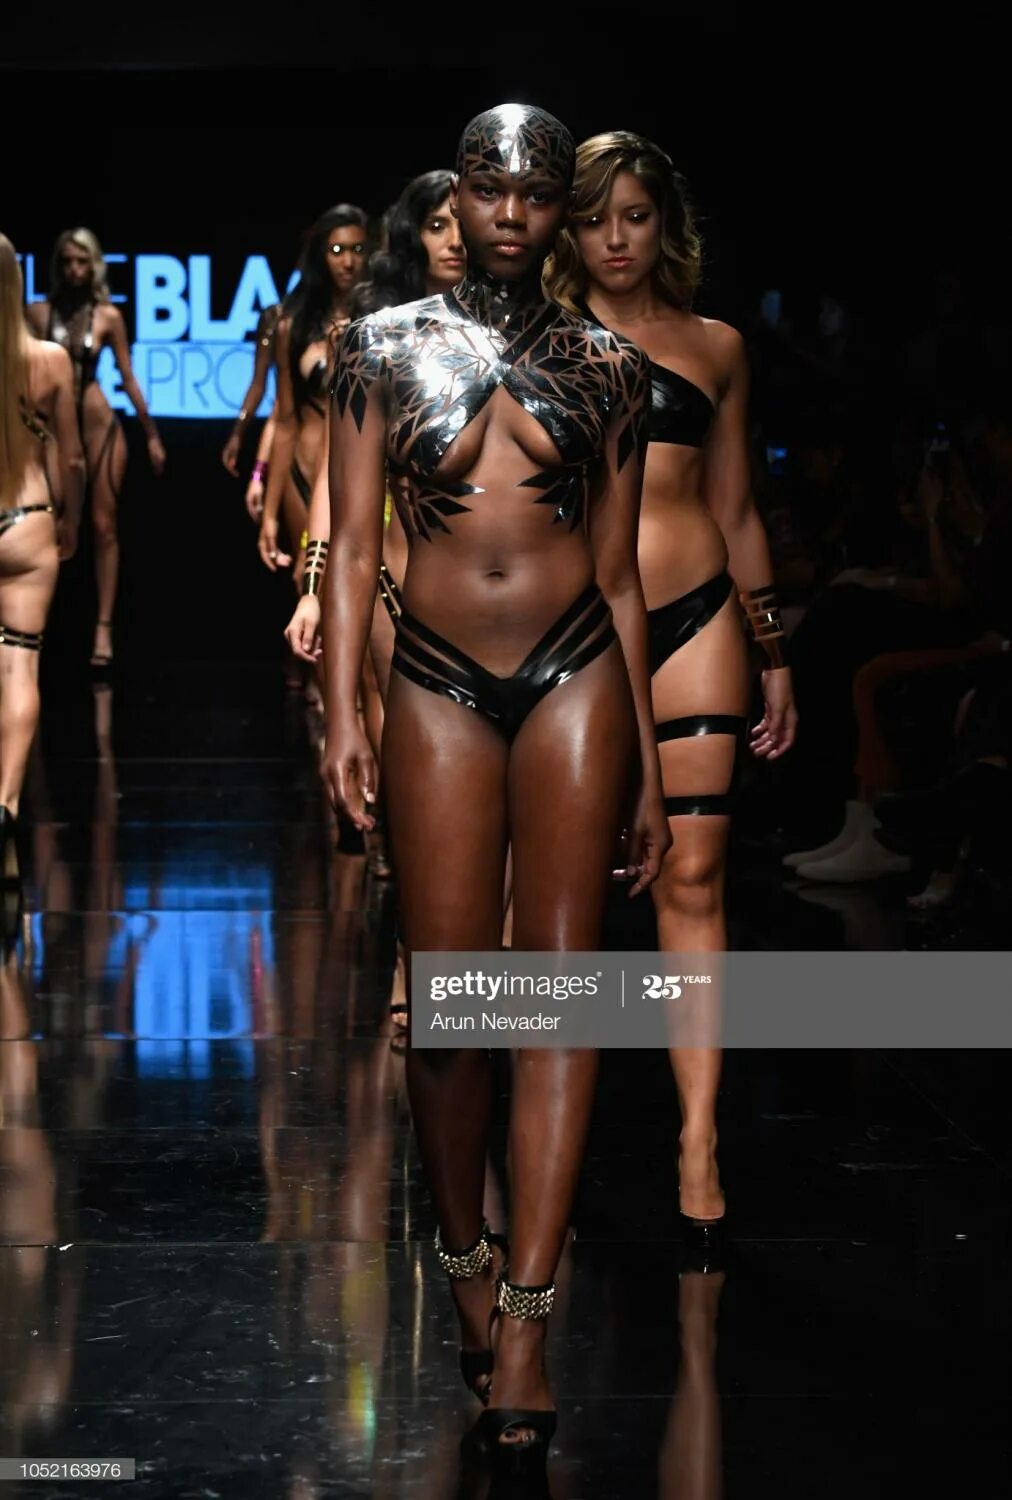 The black tape project модели. Black Tape Project 2018 участницы. Black Tape Project 2020 Арун Невадер. Black Tape Project at los Angeles Fashion week Powered by Art Hearts Fashion LAFW SS/19. Black Tape Project 2019 имена моделей.